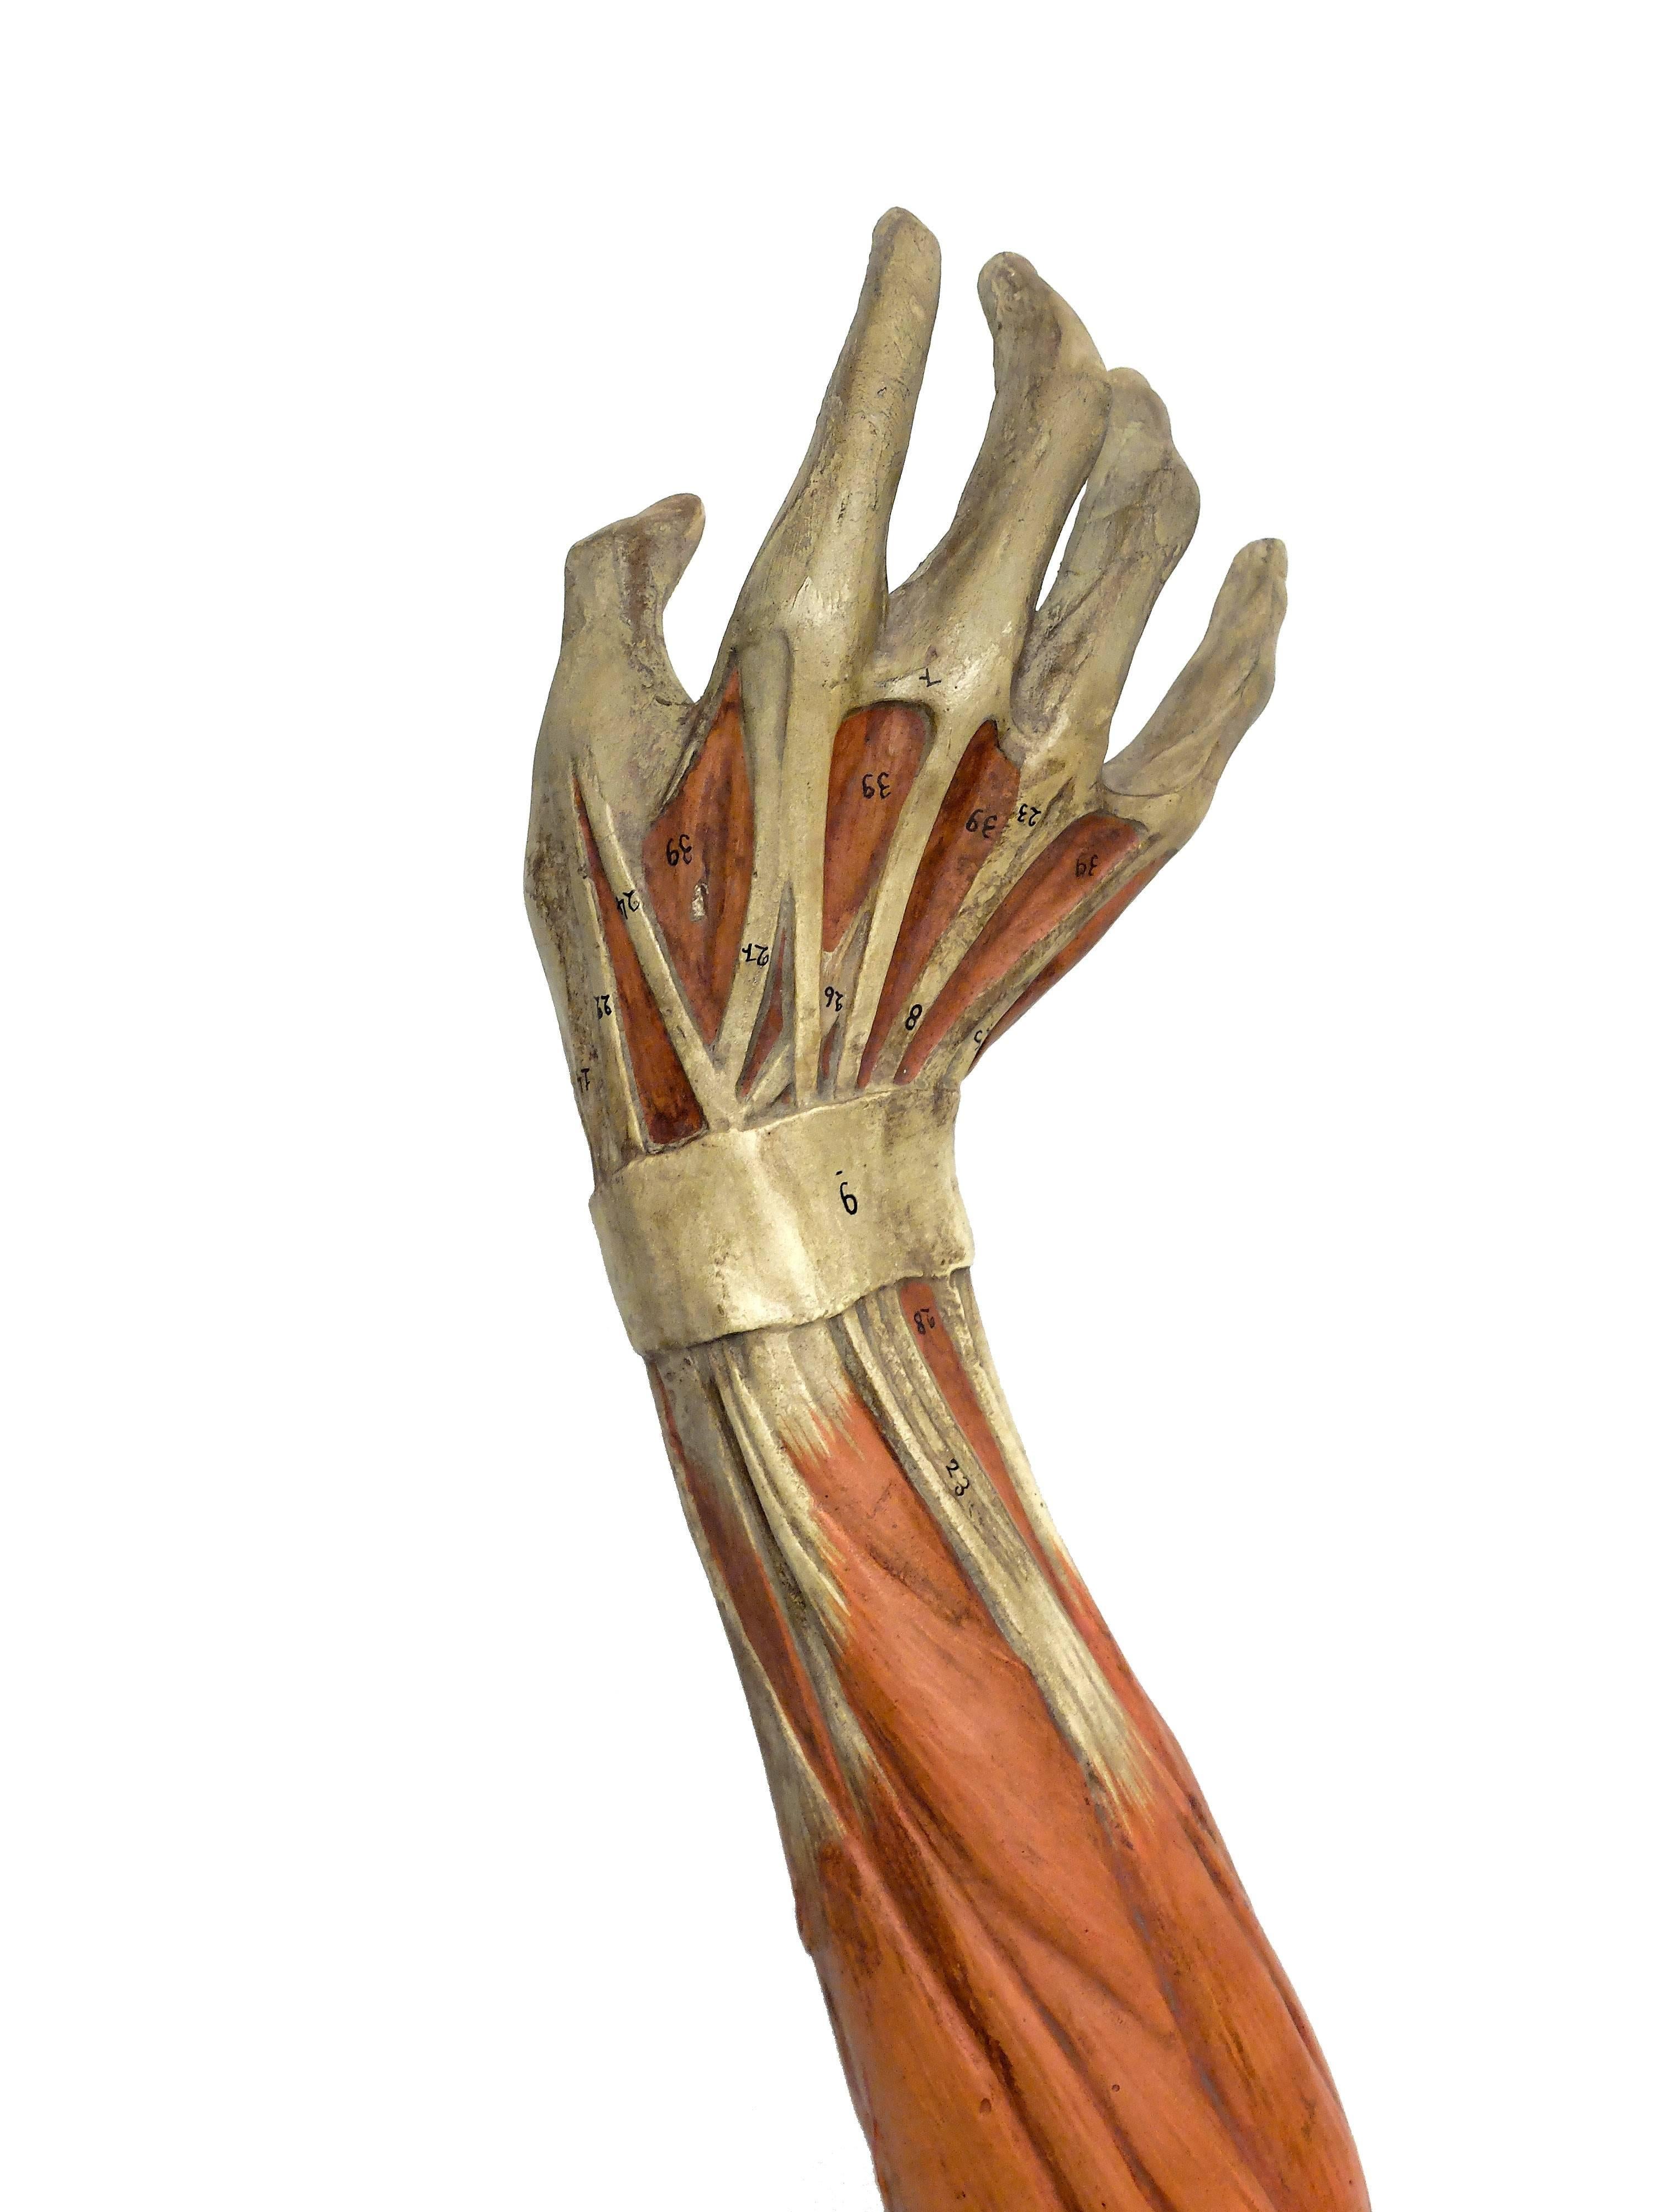 Anatomical Model of an Entire Arm Made by Paravia, Milano, Italy, circa 1890 1